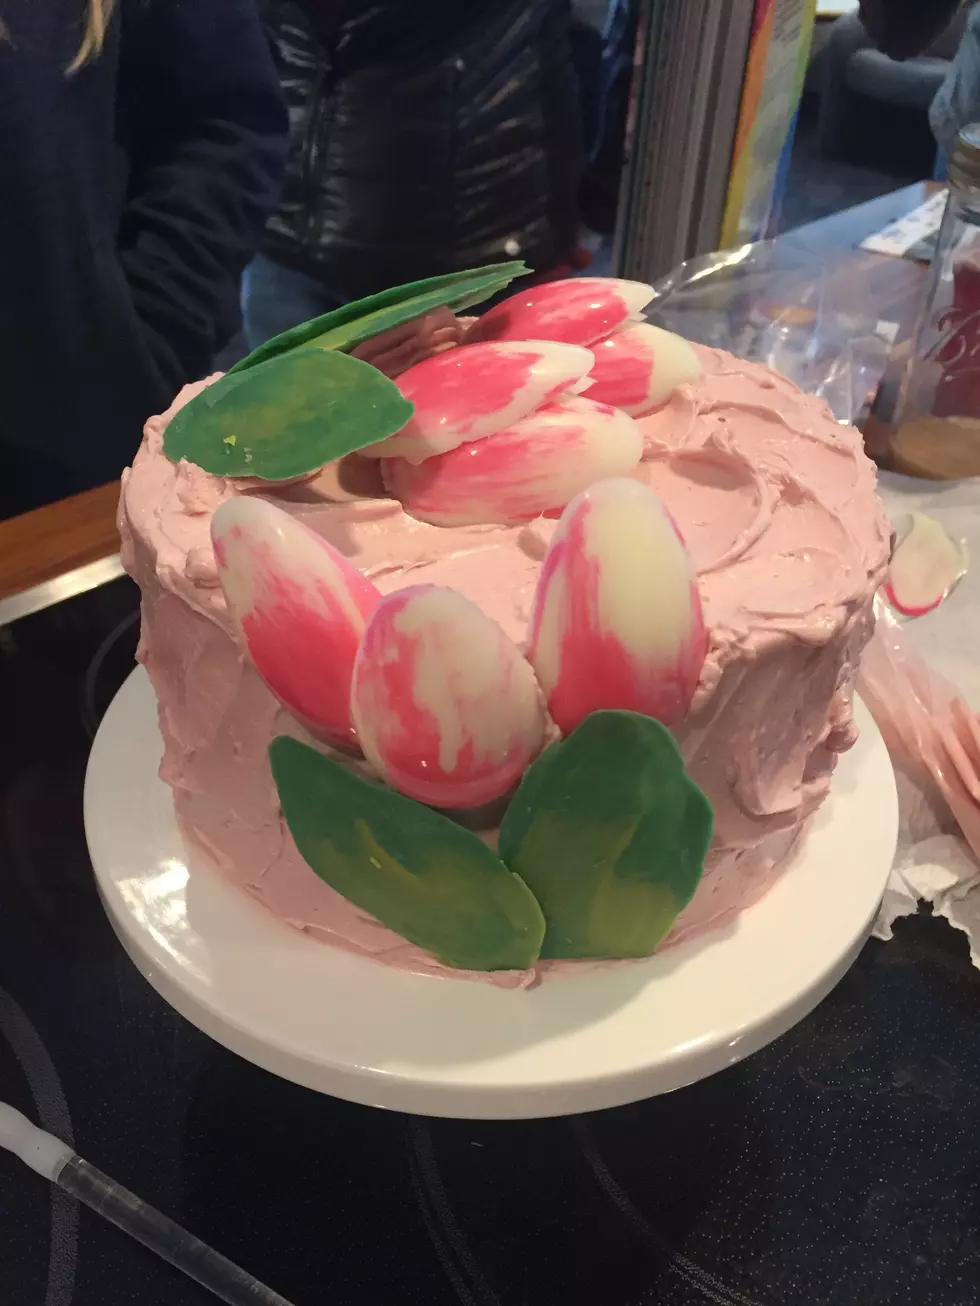 NH Chef Taught Some Very Easy Ways to Decorate A Cake – Even I Could Do It